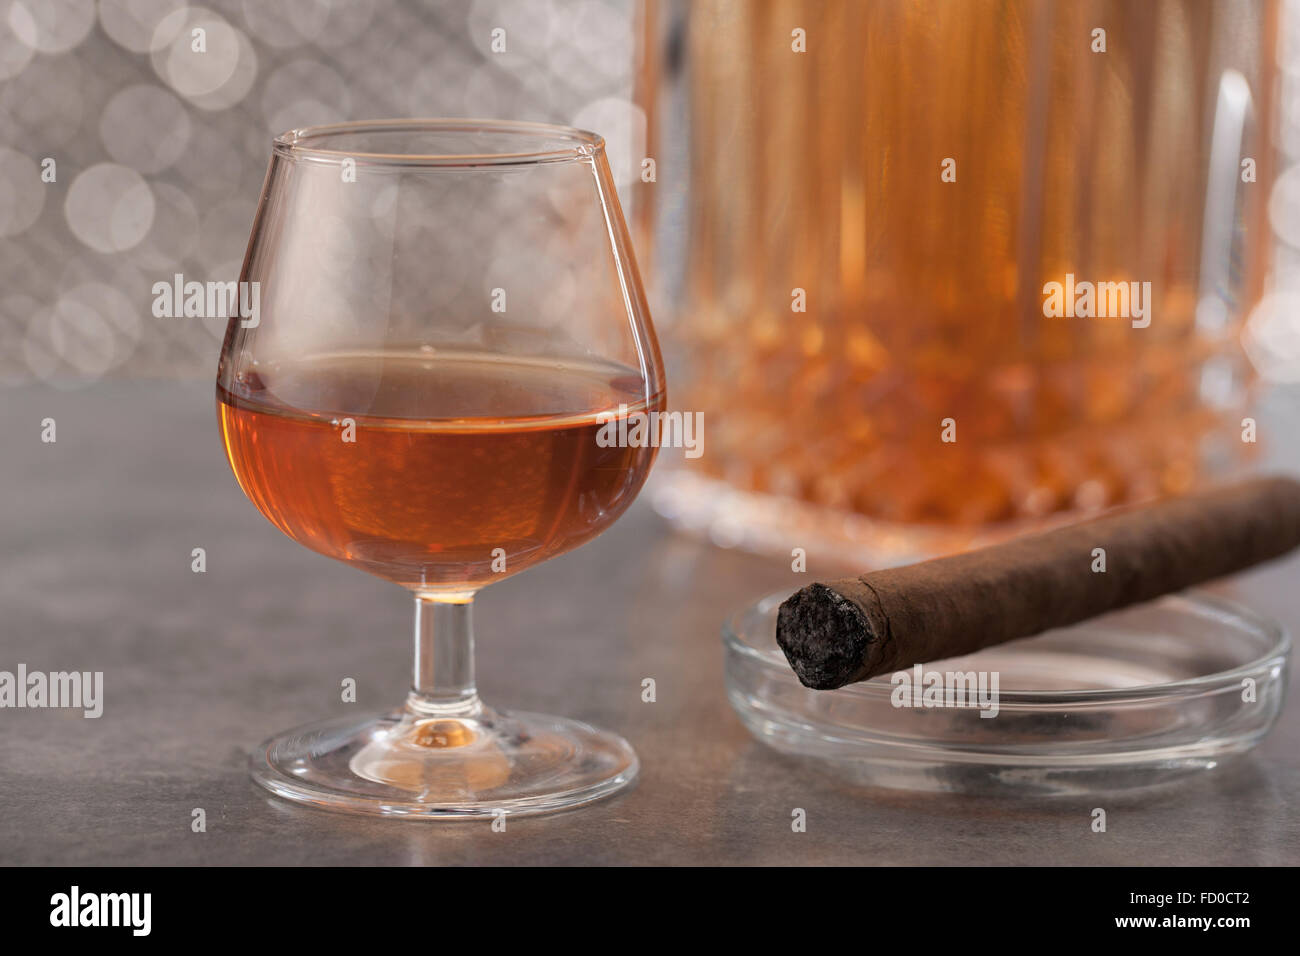 Glass of whisky and a cigar on ash tray Stock Photo